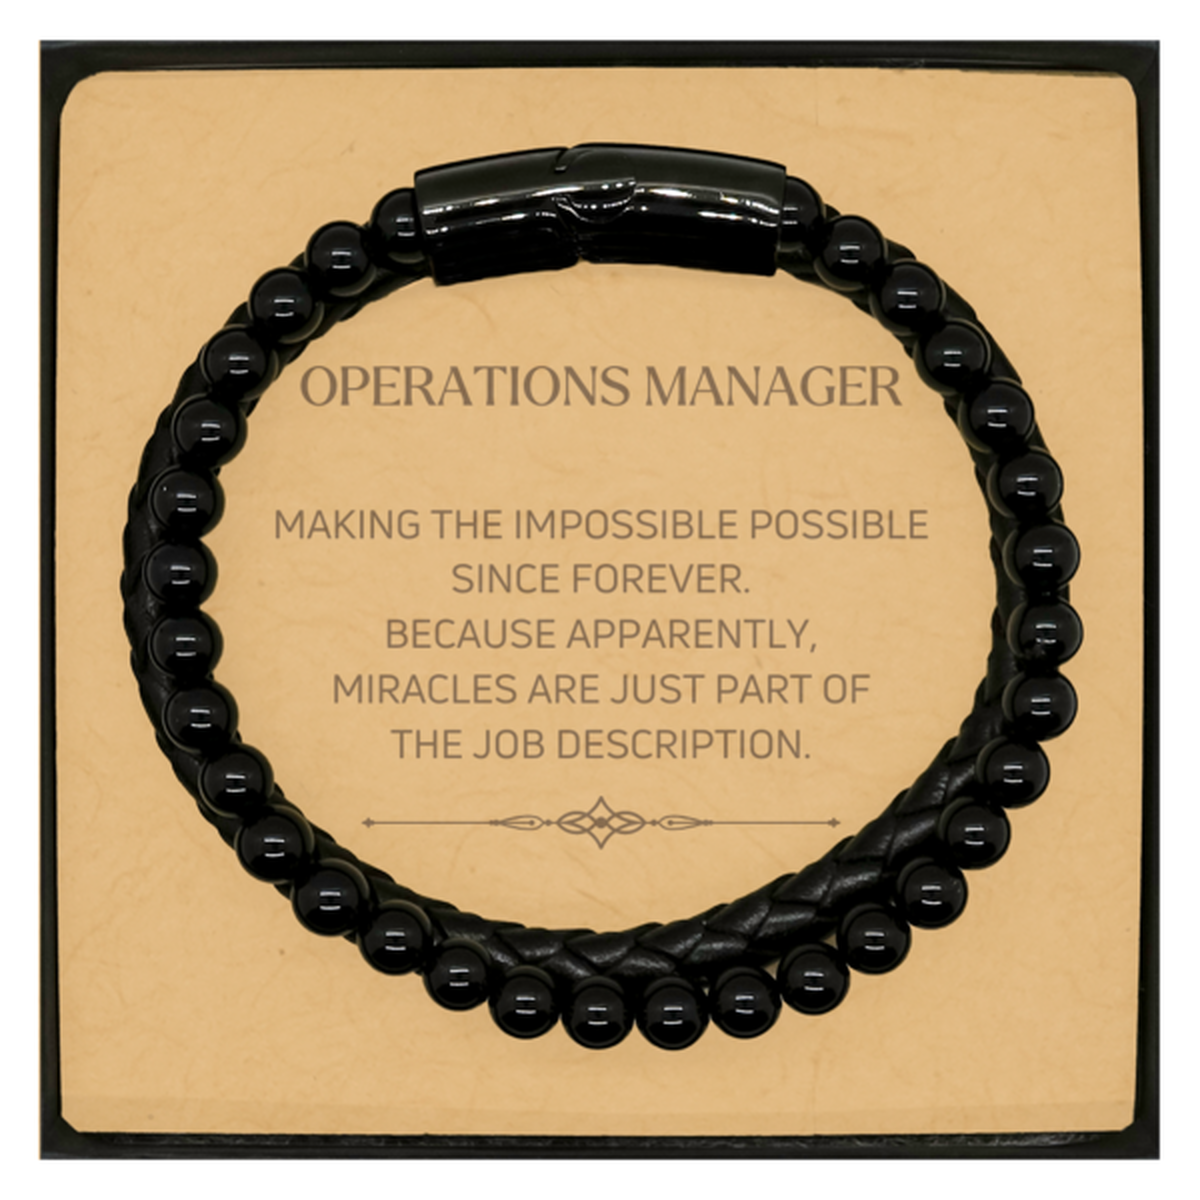 Funny Operations Manager Gifts, Miracles are just part of the job description, Inspirational Birthday Christmas Stone Leather Bracelets For Operations Manager, Men, Women, Coworkers, Friends, Boss